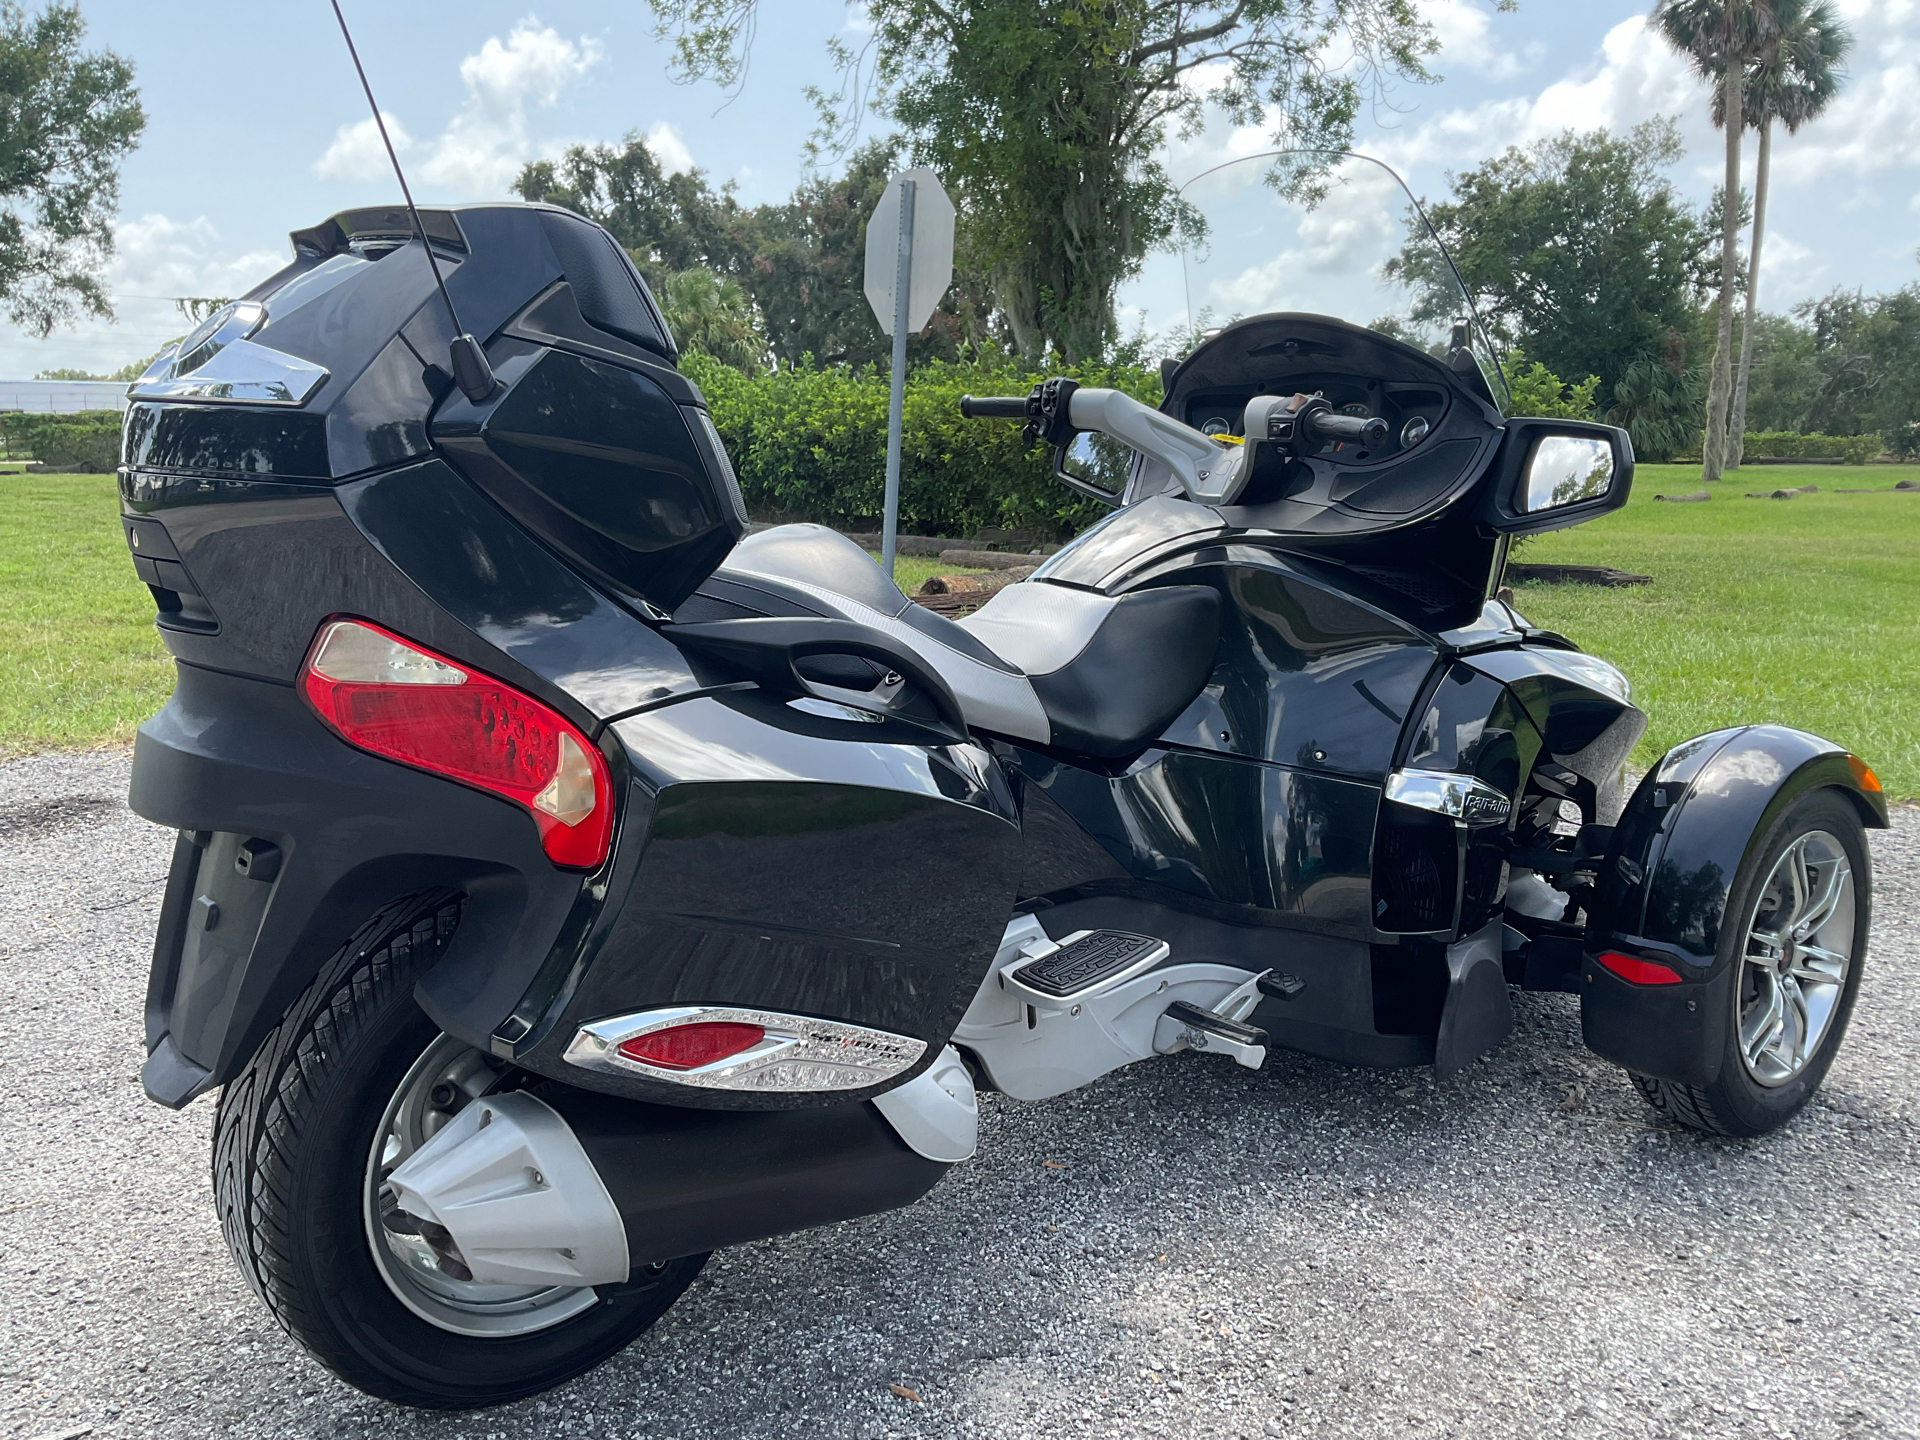 2011 Can-Am Spyder® RT-S SE5 in Sanford, Florida - Photo 10